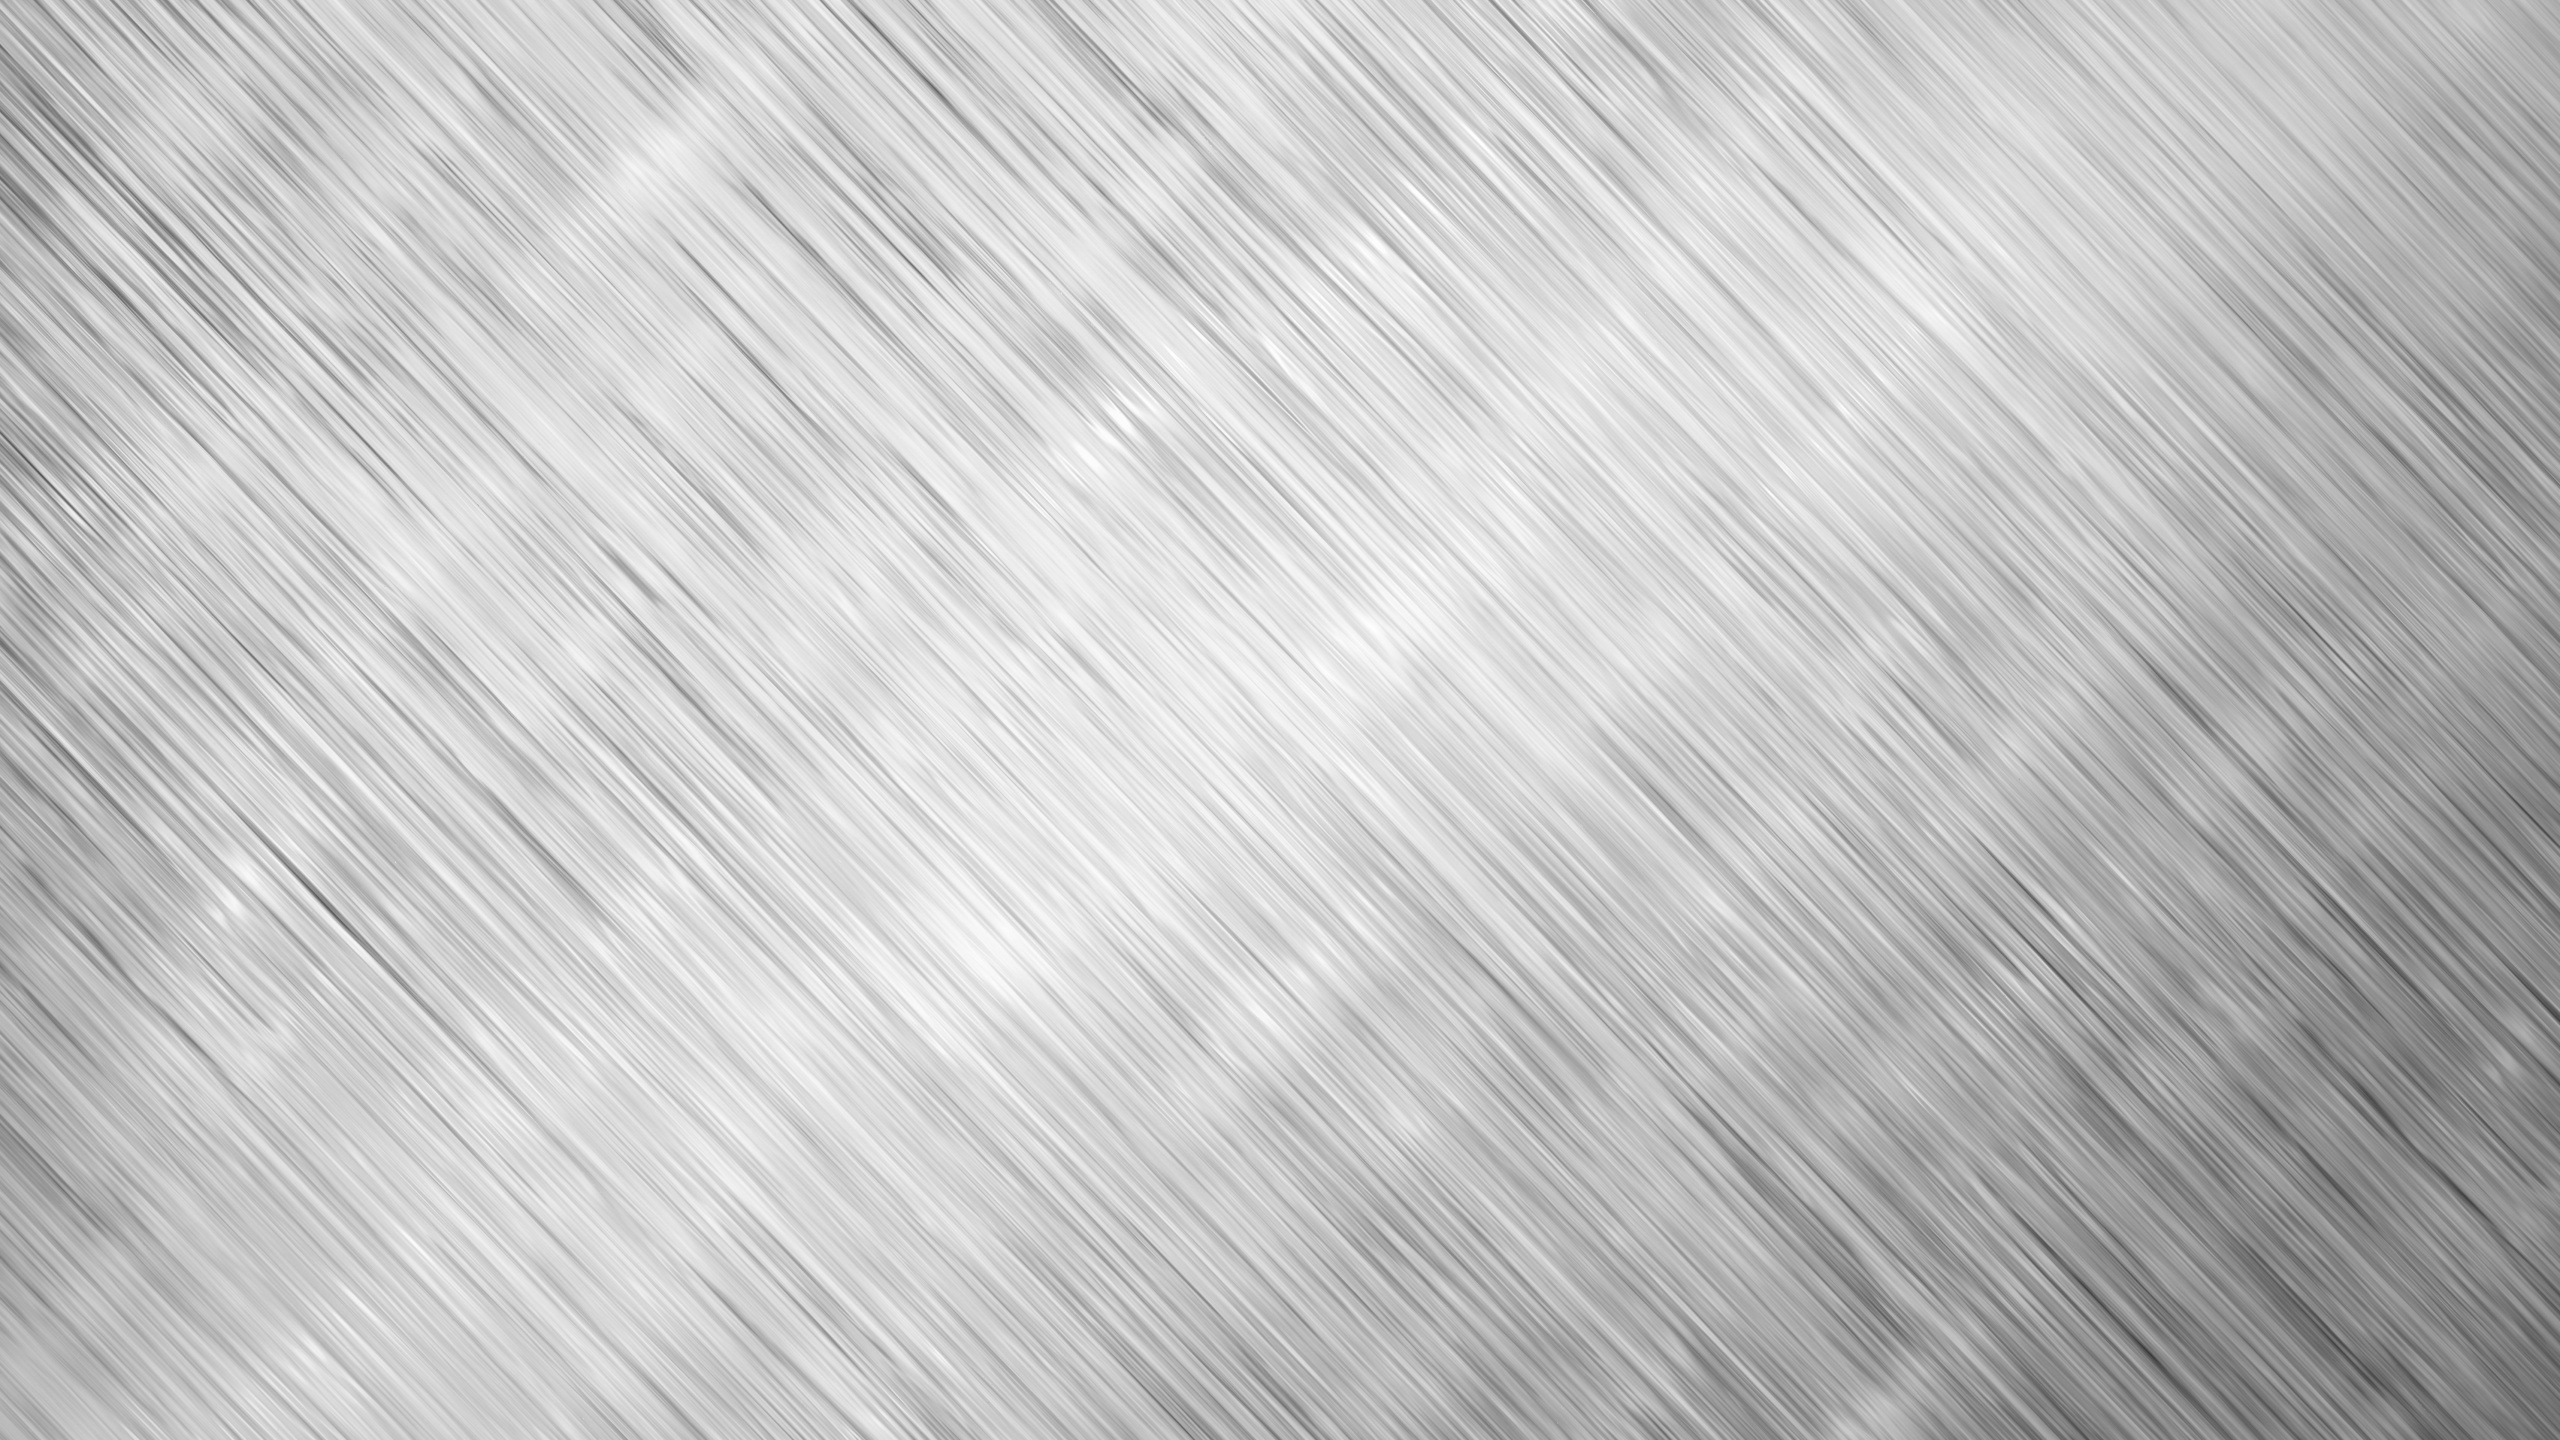 Grey and White Striped Textile. Wallpaper in 2560x1440 Resolution